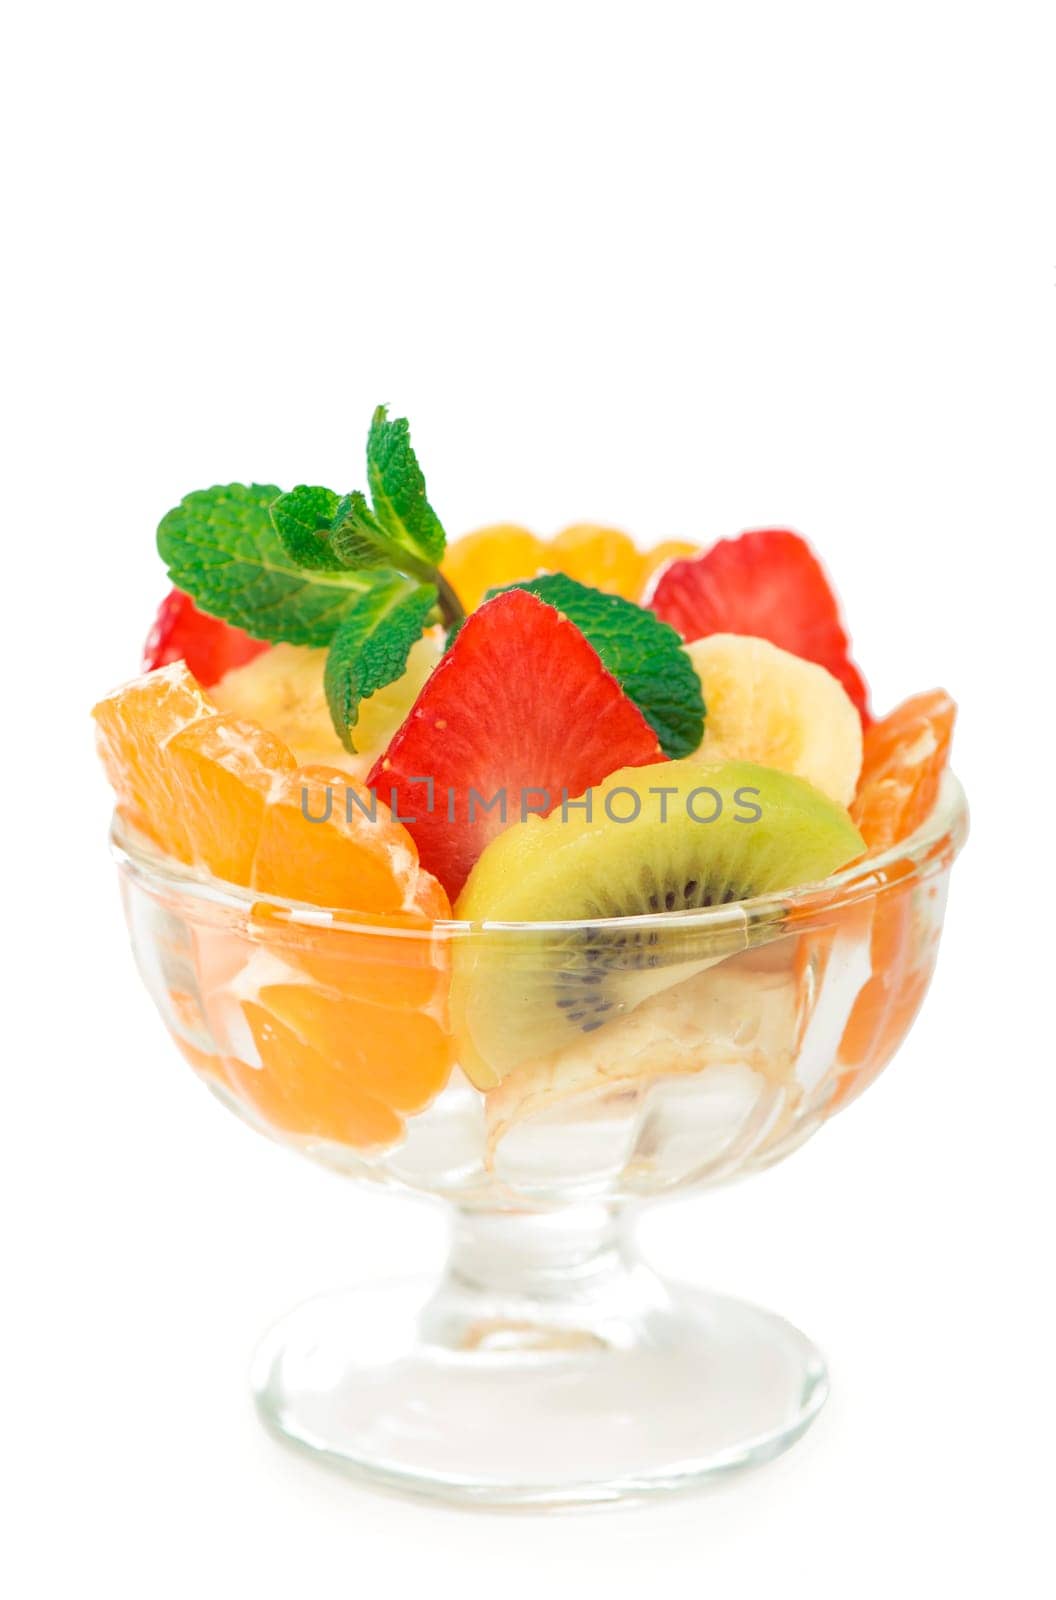 glass bowl with fresh fruits salad by aprilphoto